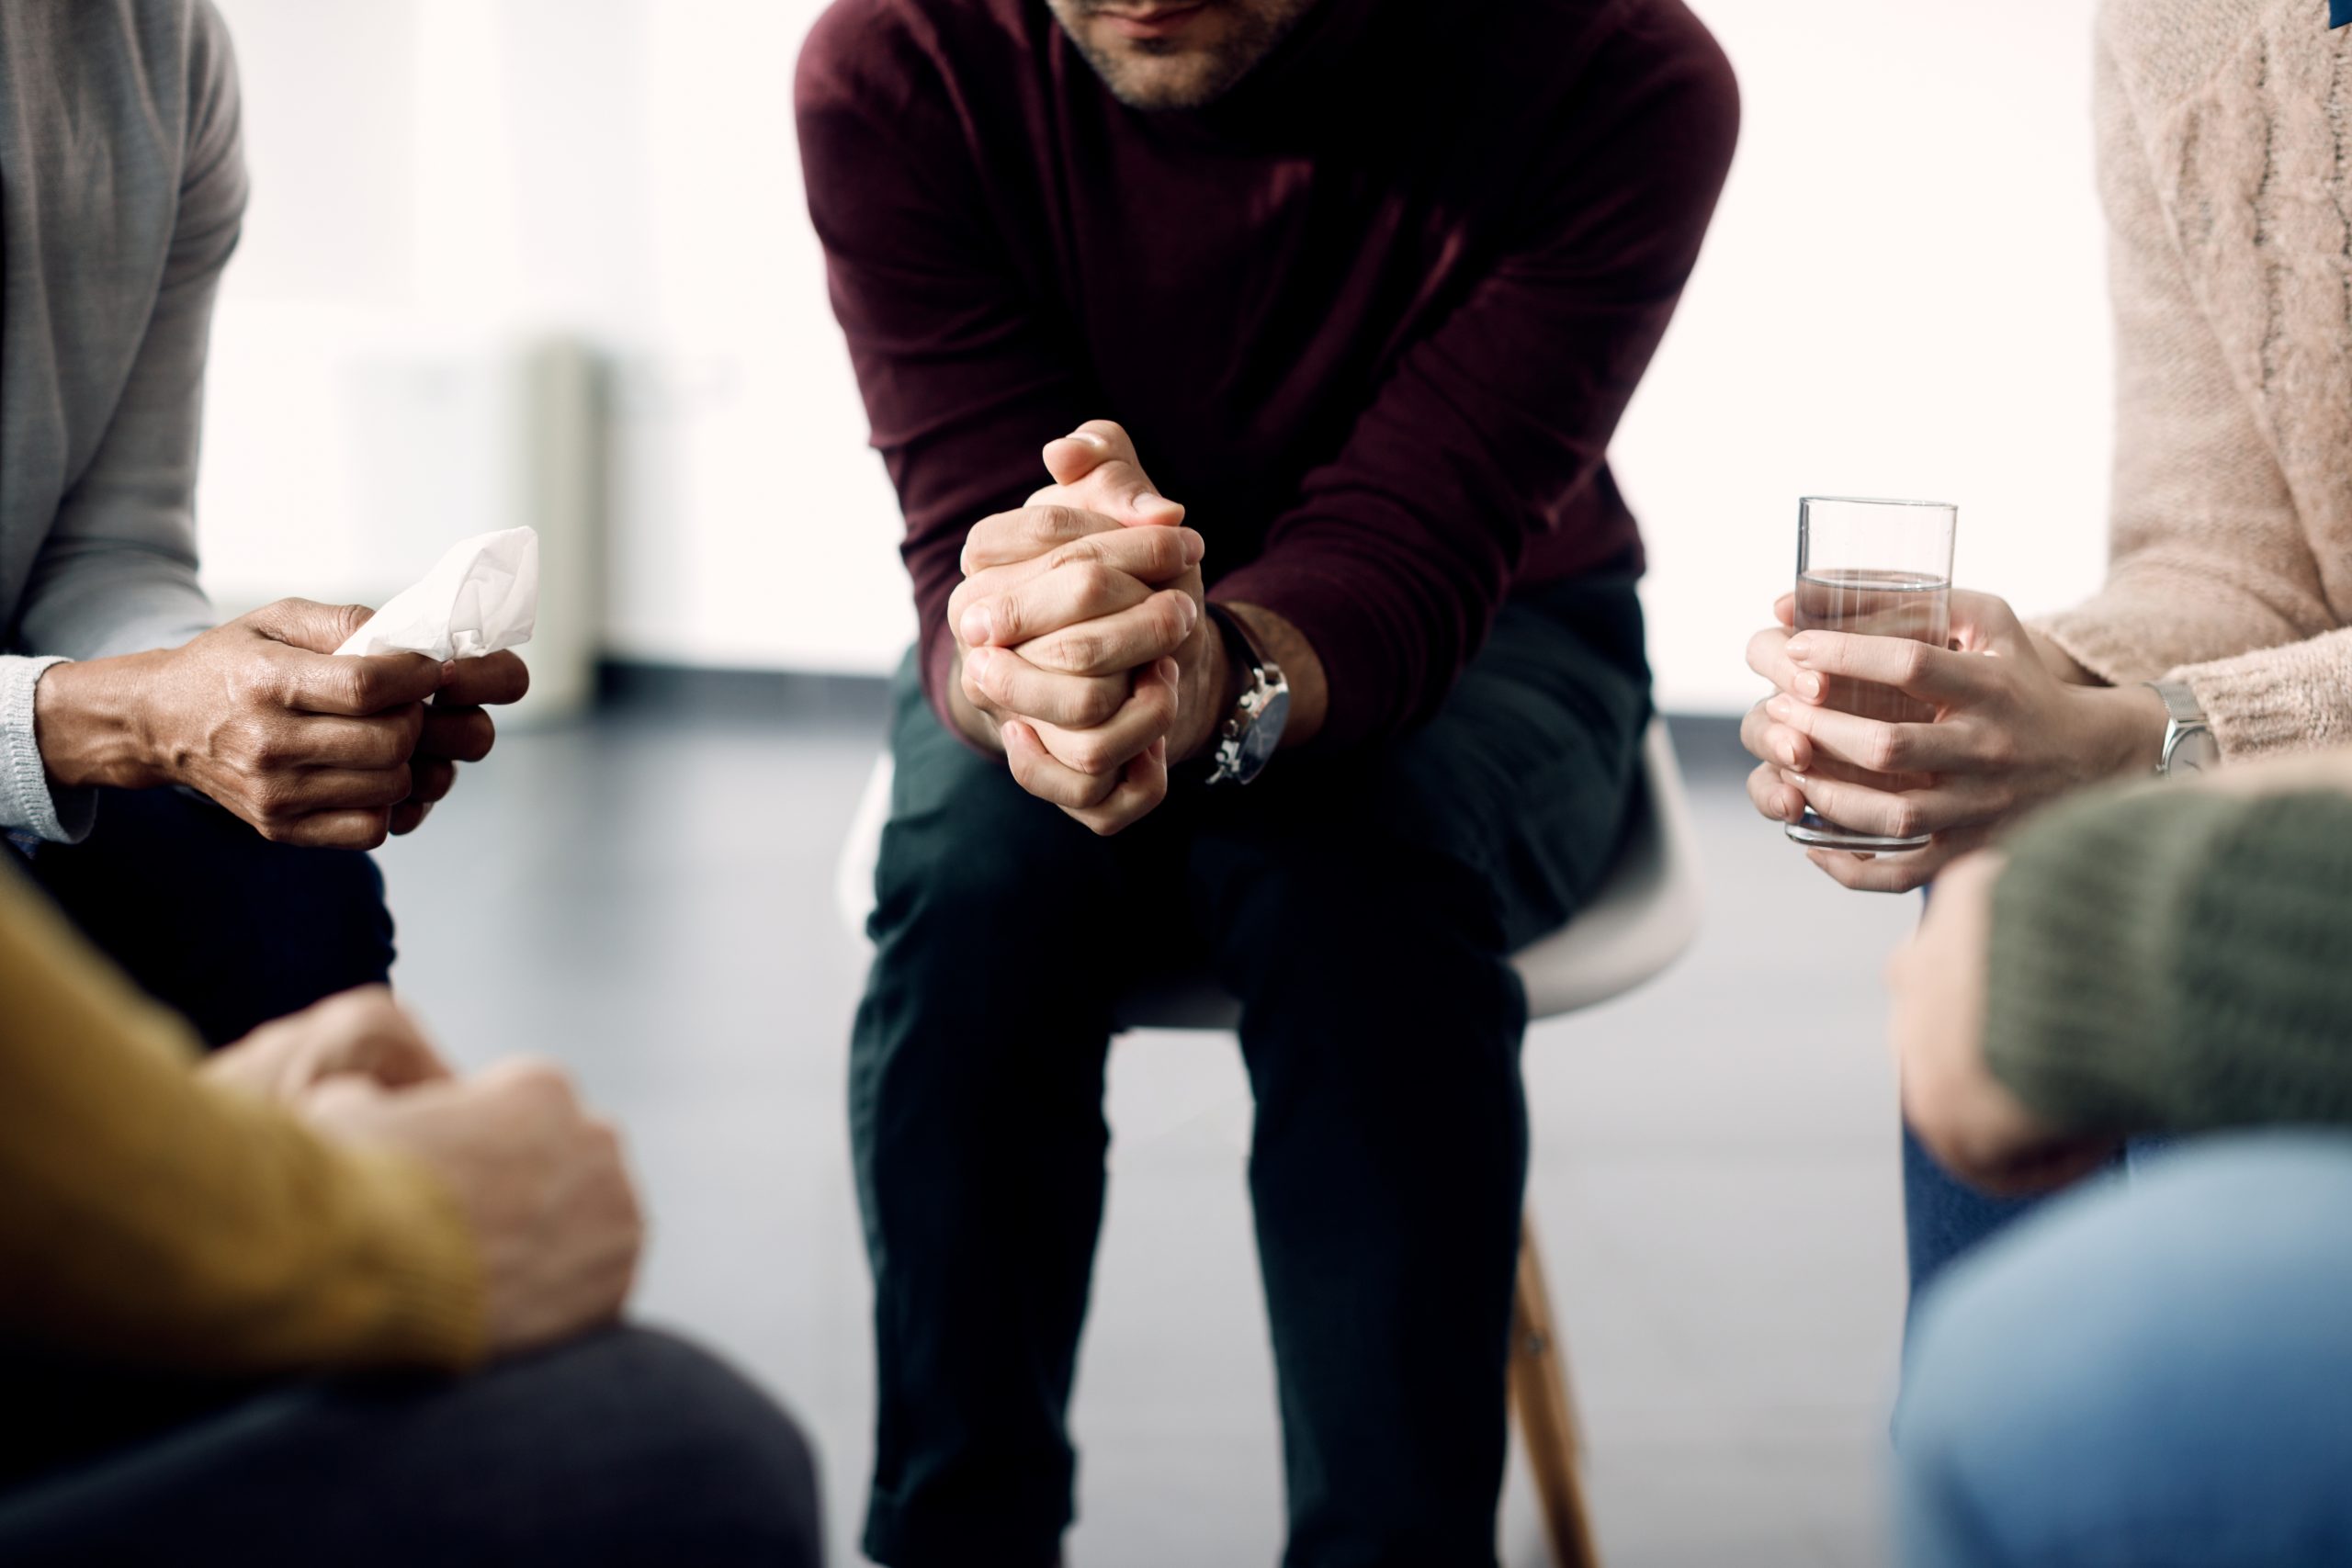 Photographic image depicting a close up of a bunch of people sitting in a circle. The people's faces aren't visible, but the central figure is leaned forward clasping his hands as if he's about to engage in a serious discussion of Opioid Advocacy